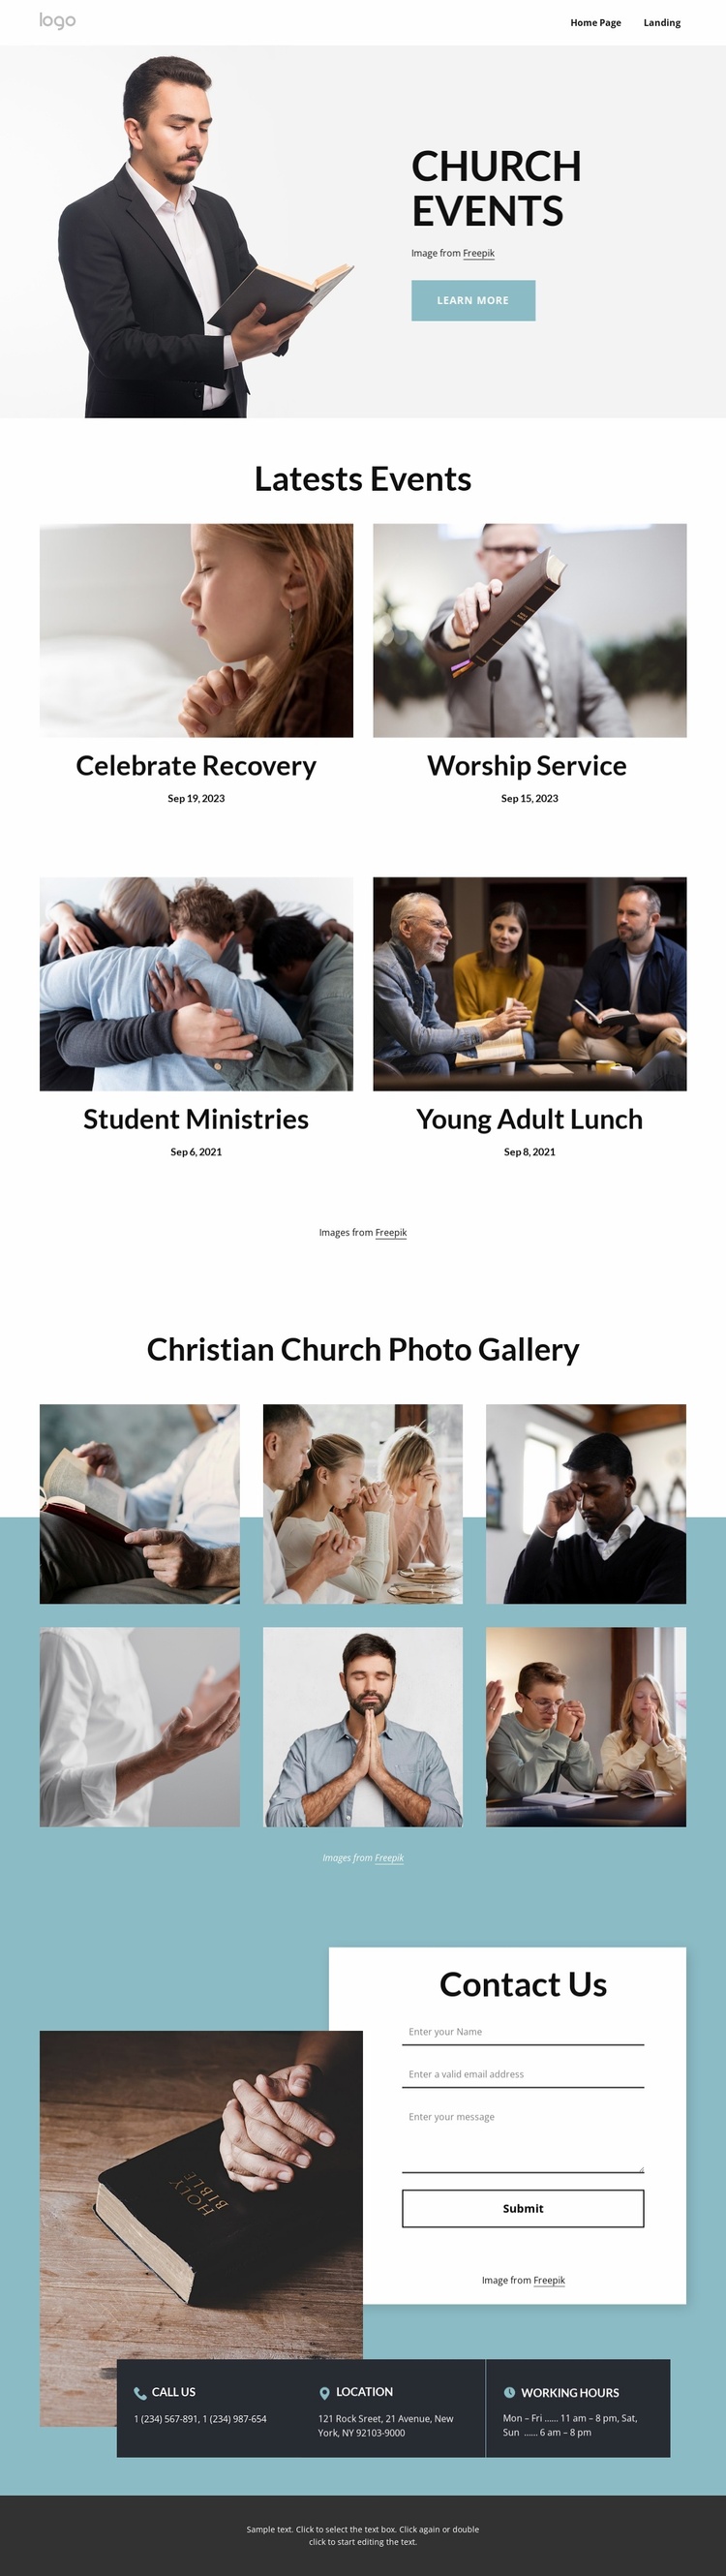 Church events eCommerce Template